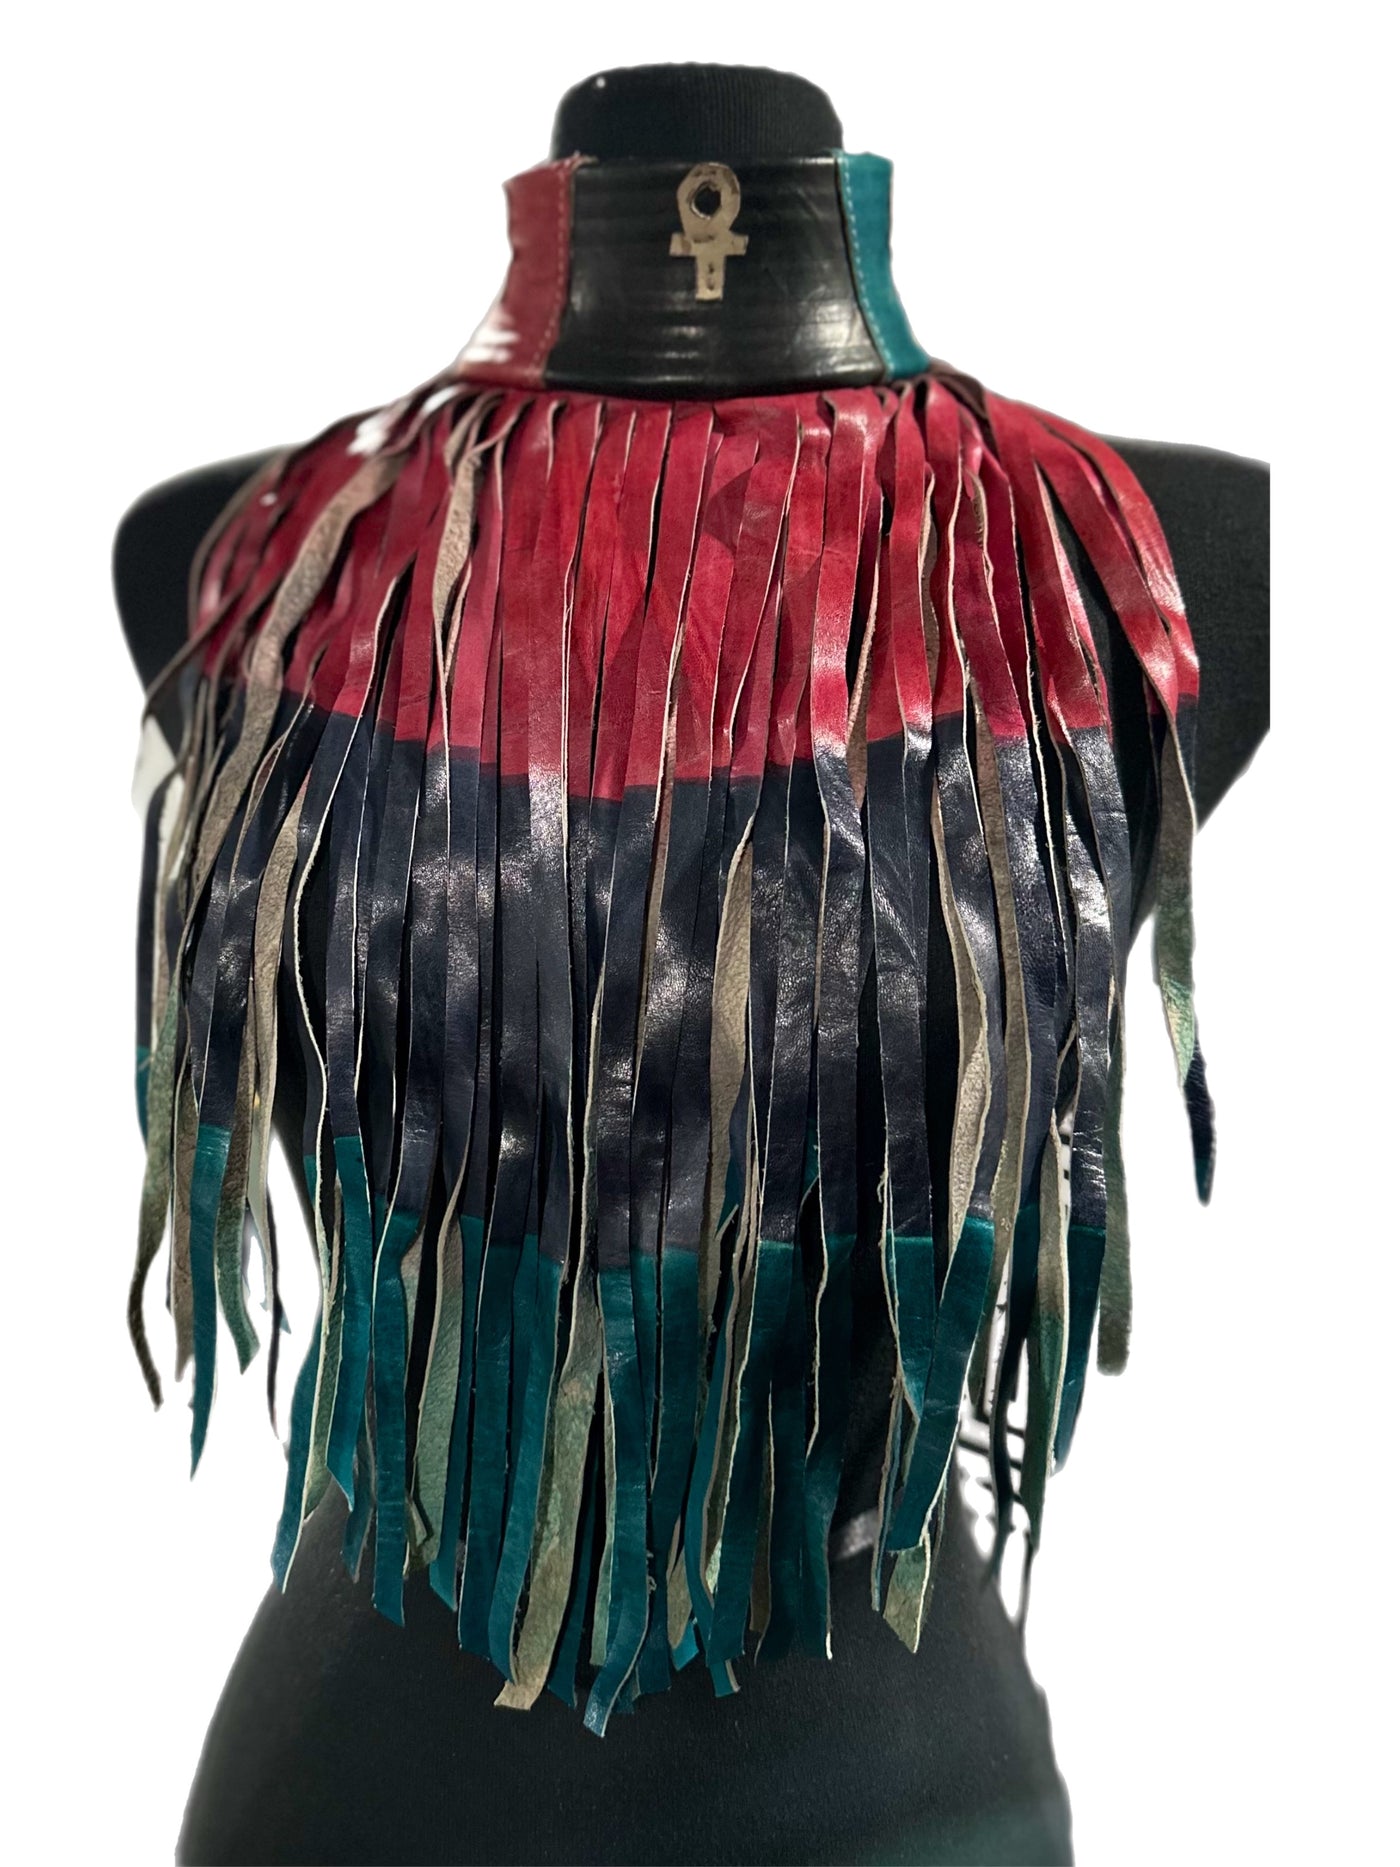 Mali Fringe Tie-and-Dye Genuine Leather Choker / Necklace